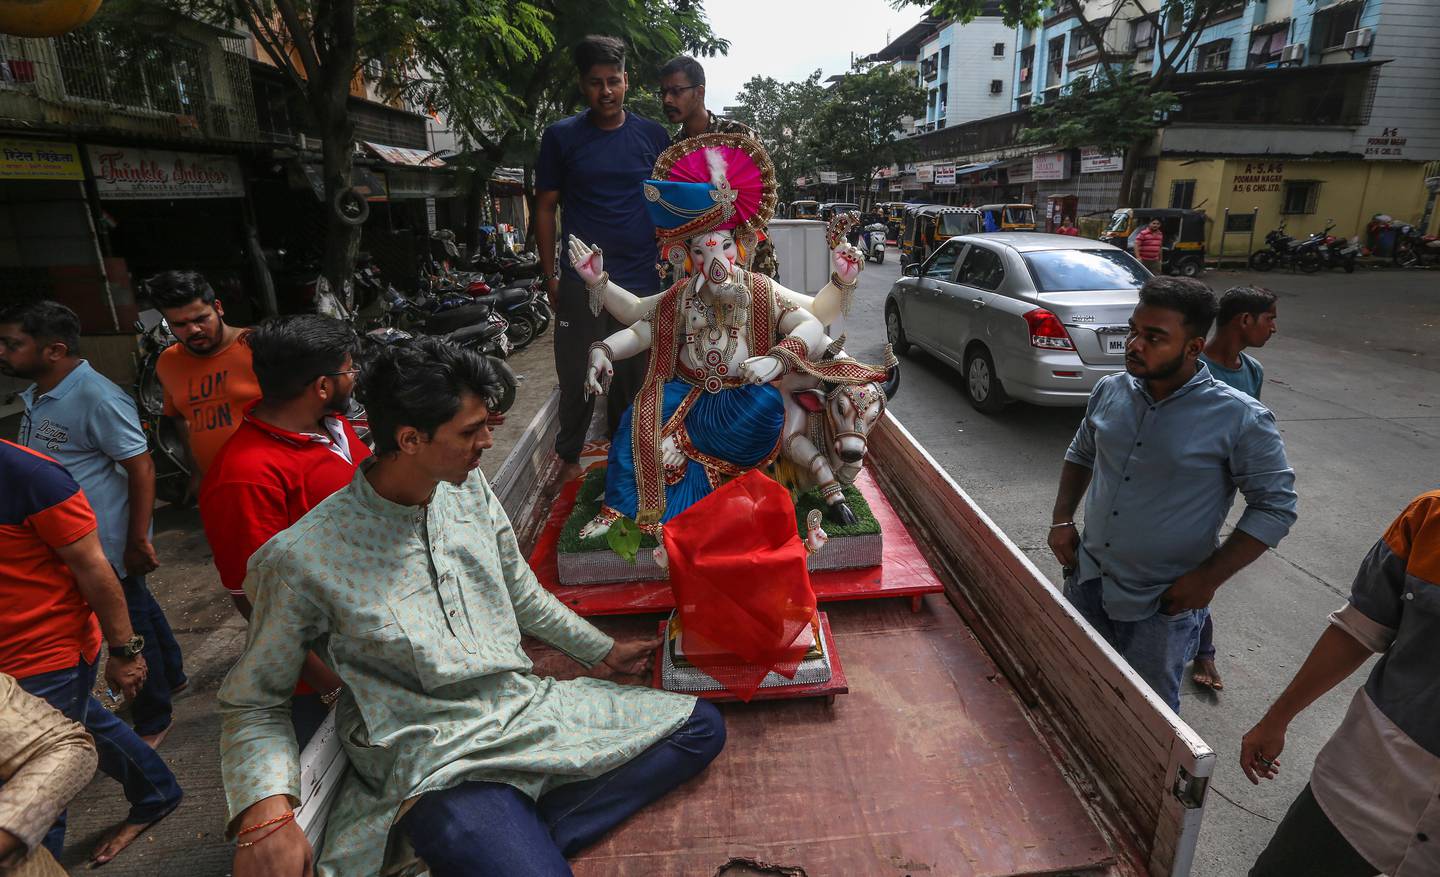 Indian devotees transport an idol of the elephant-headed Hindu god Ganesh in Mumbai, India, on August 31, 2022.  The Ganesh Chaturthi festival is a 10-day event celebrated all over India. EPA